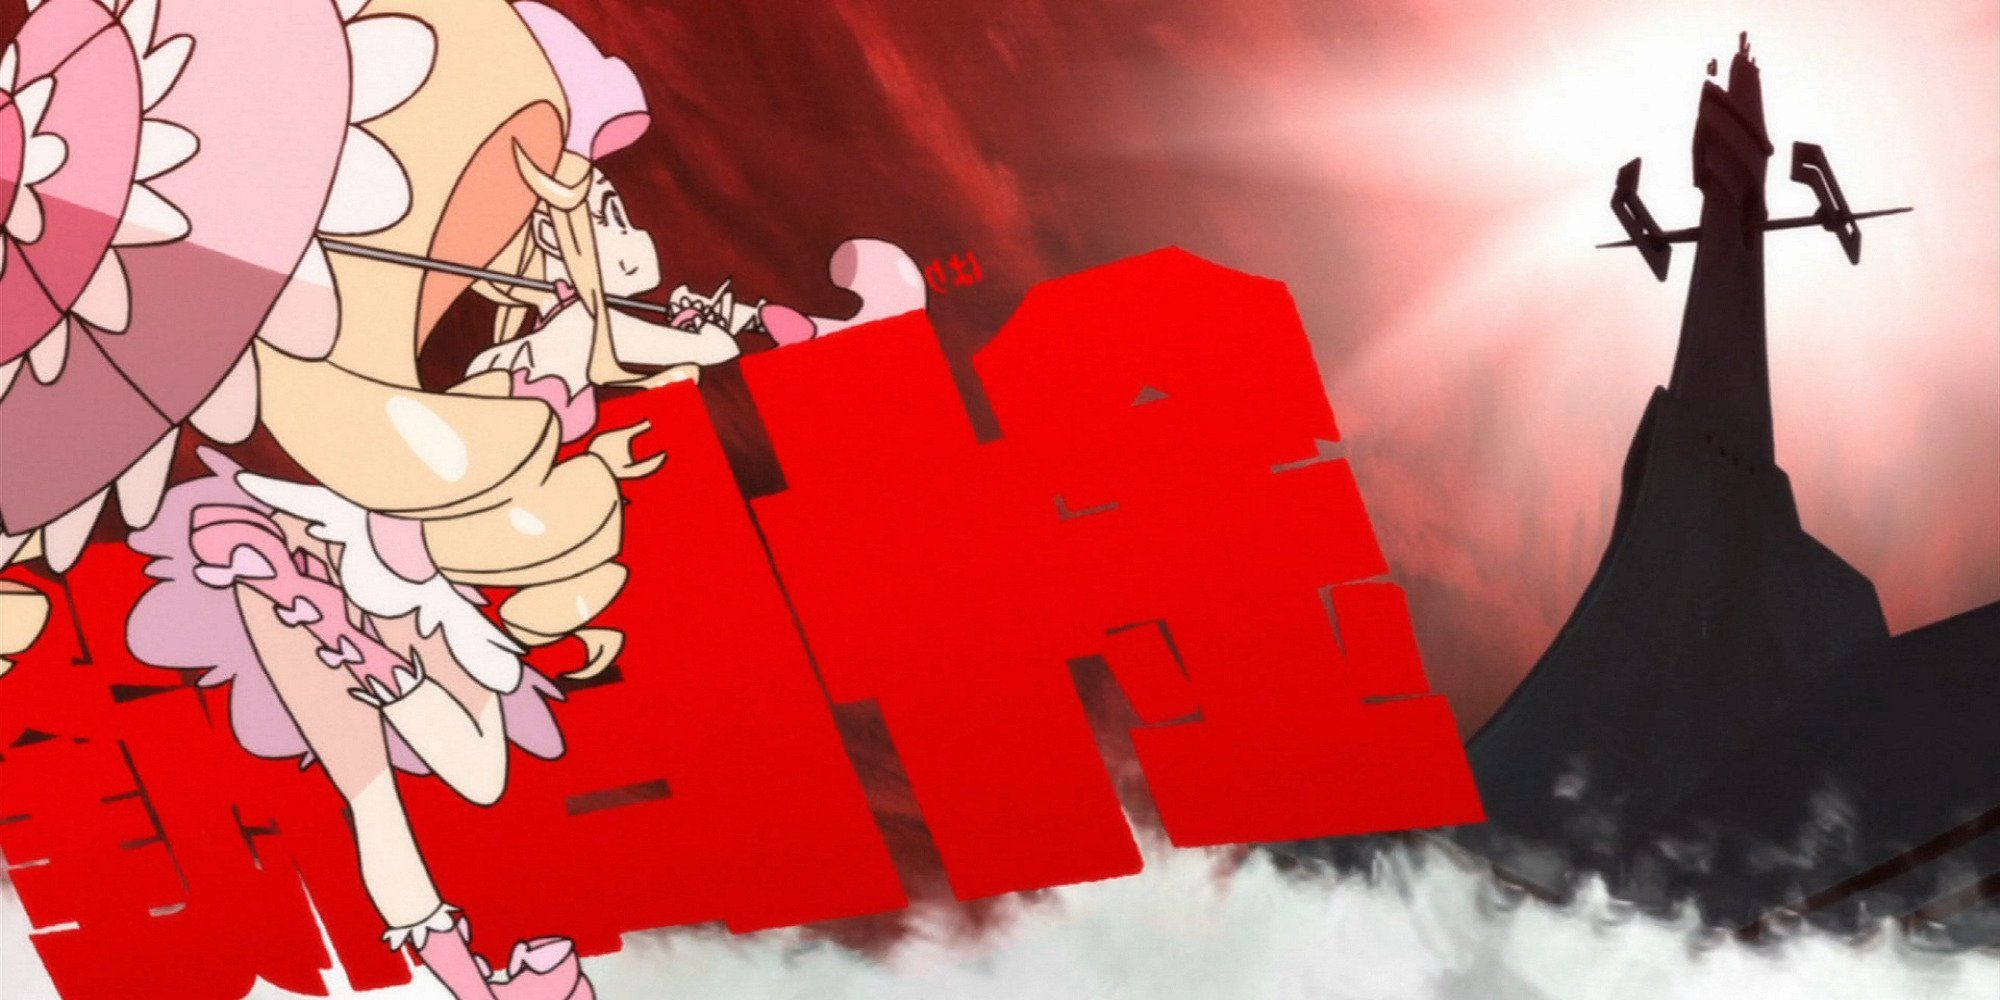 Nui Harime literally leaning on the fourth wall with a grim tower in front of her.